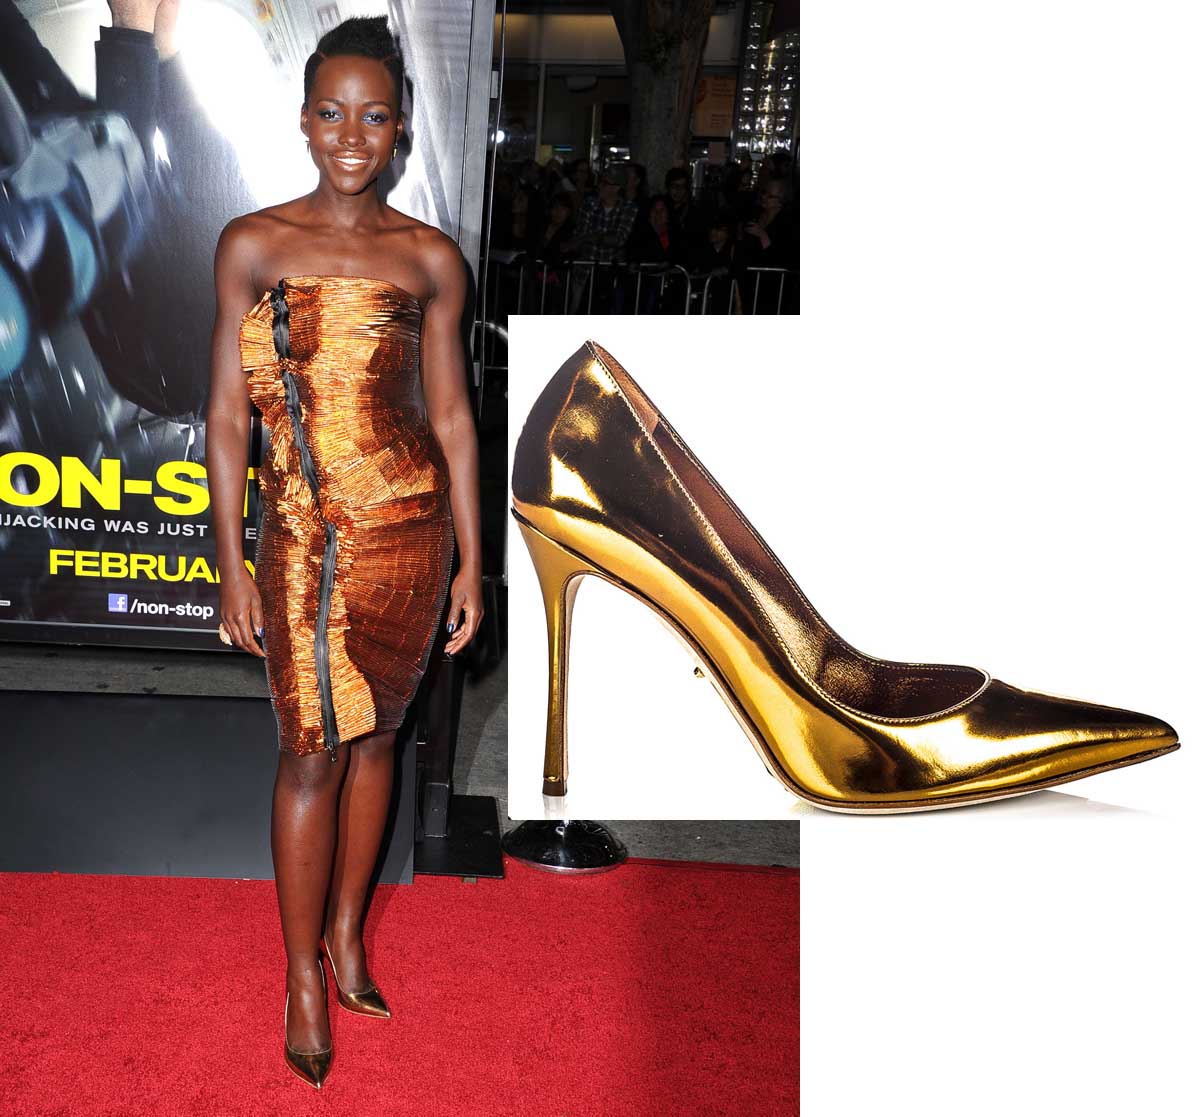 #ThrowbackThursday: Lupita Nyong’o Walks the Red Carpet on Sergio Rossi